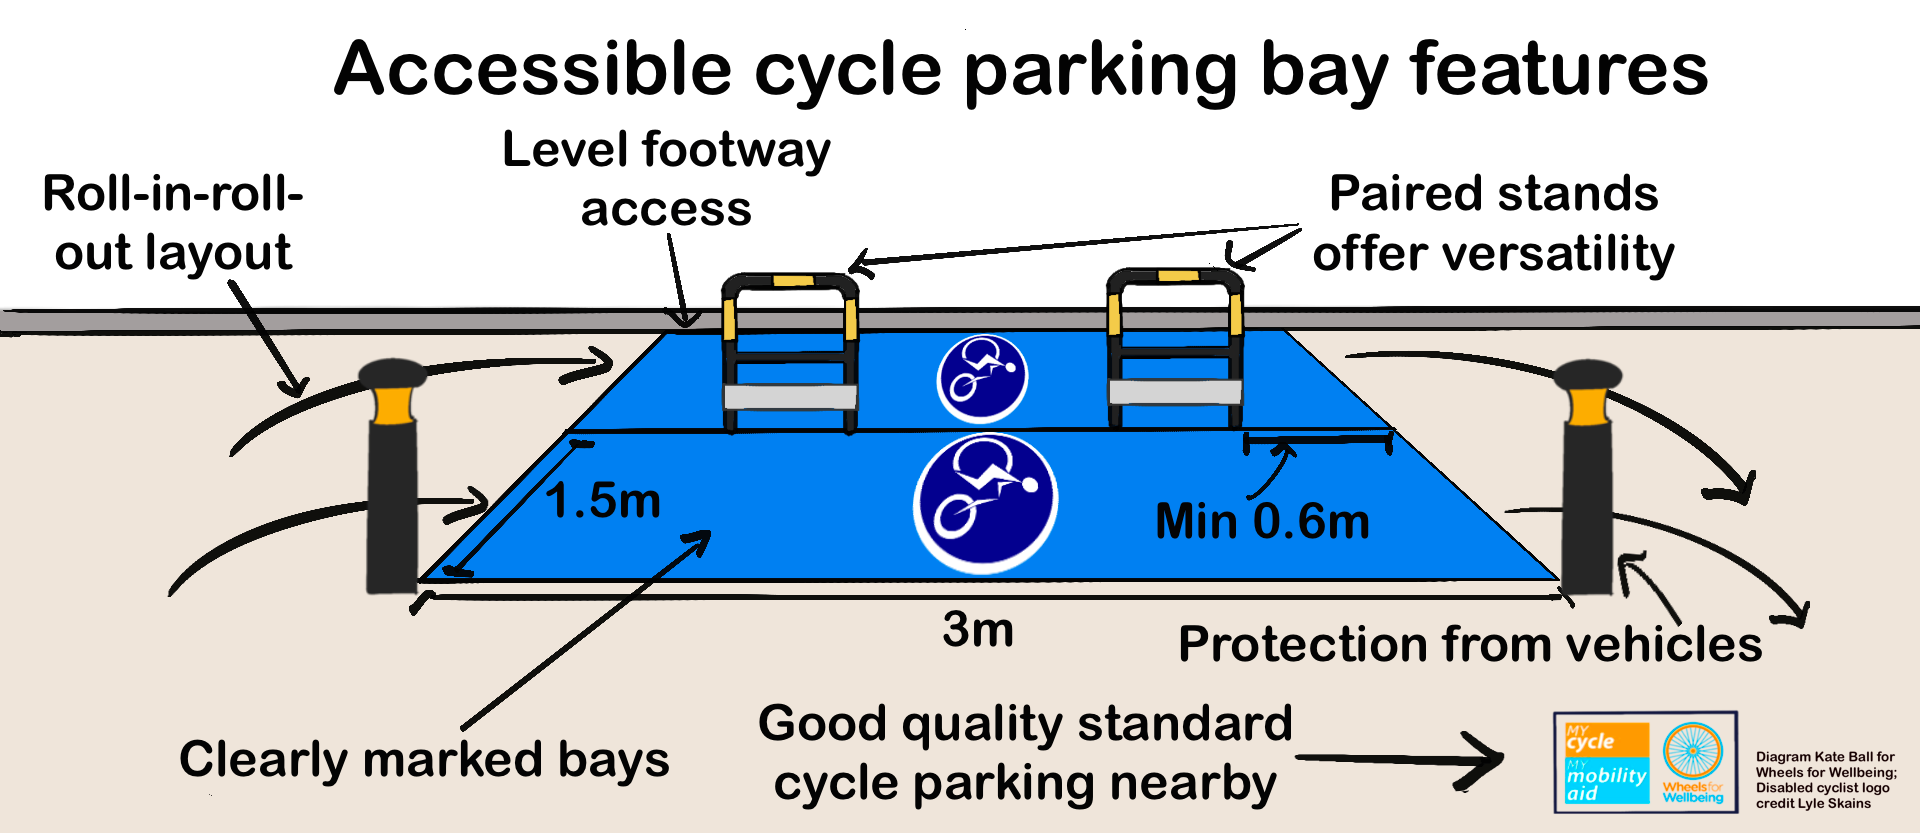 Graphic titled "accessible cycle parking bay features" shows a pair of blue coloured Disabled access cycle parking spaces marked with Disabled handcyclist logos, with two vehicle protection bollards in the foreground, two stands in between the parking bays and a pavement in the background. Labels read: Roll-in-roll-out layout, level footway access, paired stands offer versatility, (for bollards) protection from vehicles, clearly marked bays, an arrow points to "good quality standard cycle parking nearby", bay length 3m, each space has width 1.5m and cycle stands are min 0.6m from bay ends. The Wheels for Wellbeing logo, My Cycle My Mobility Aid logo and text "diagram Kate Ball for Wheels for Wellbeing, Disabled cyclist logo credit Lyle Skains" is in the bottom right corner.